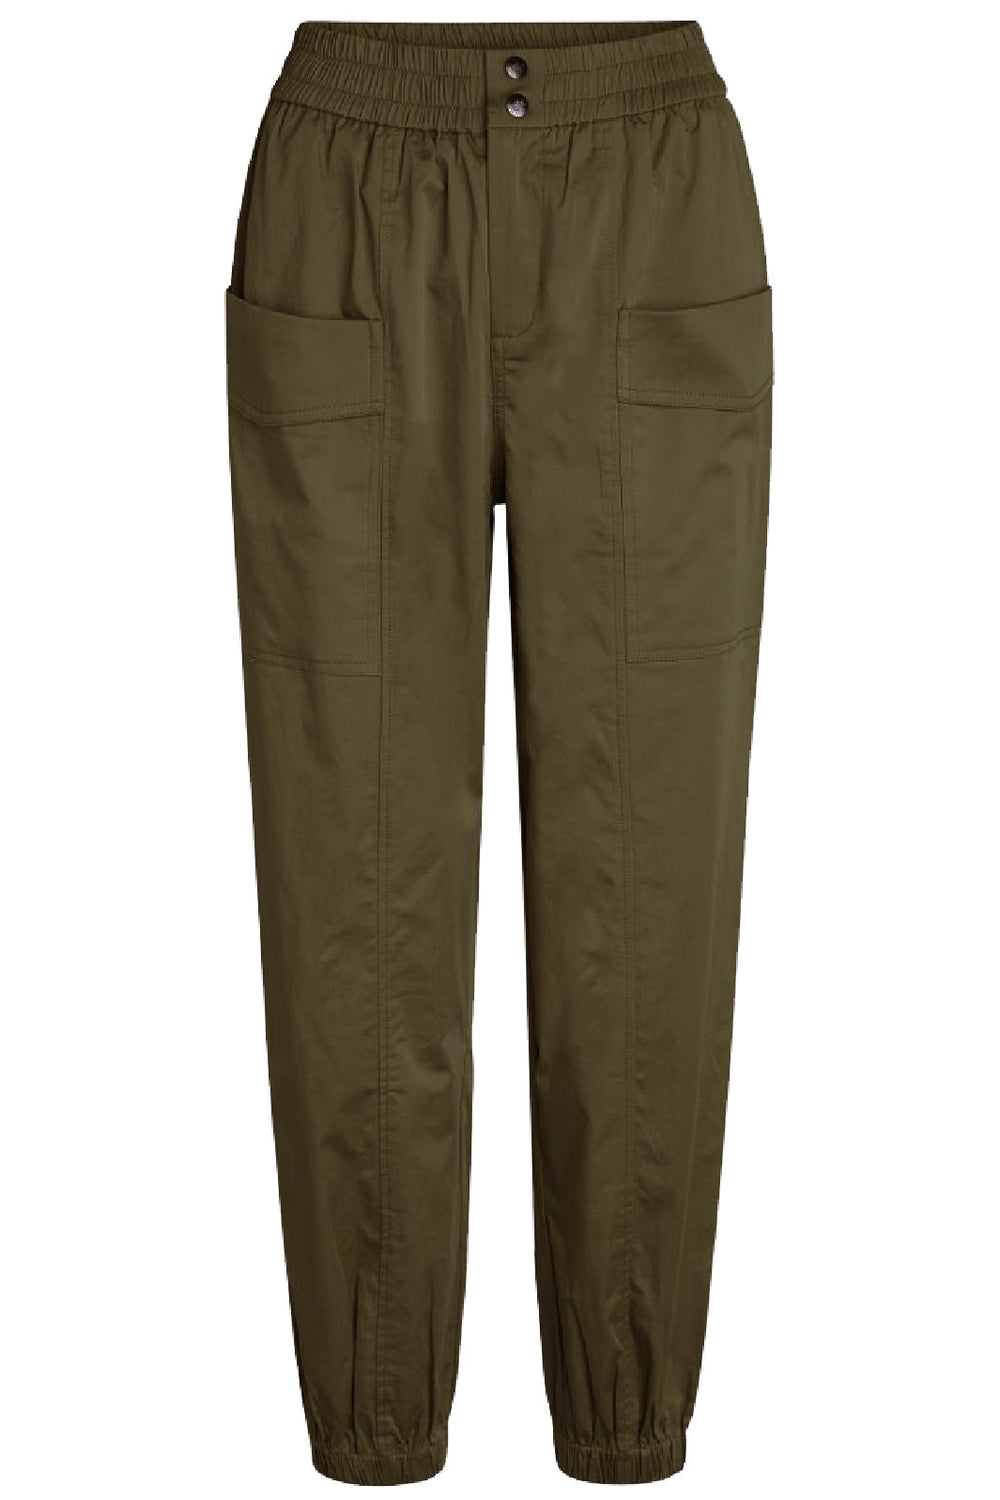 Co'couture - Marshall Pocket Pant - Army Bukser 